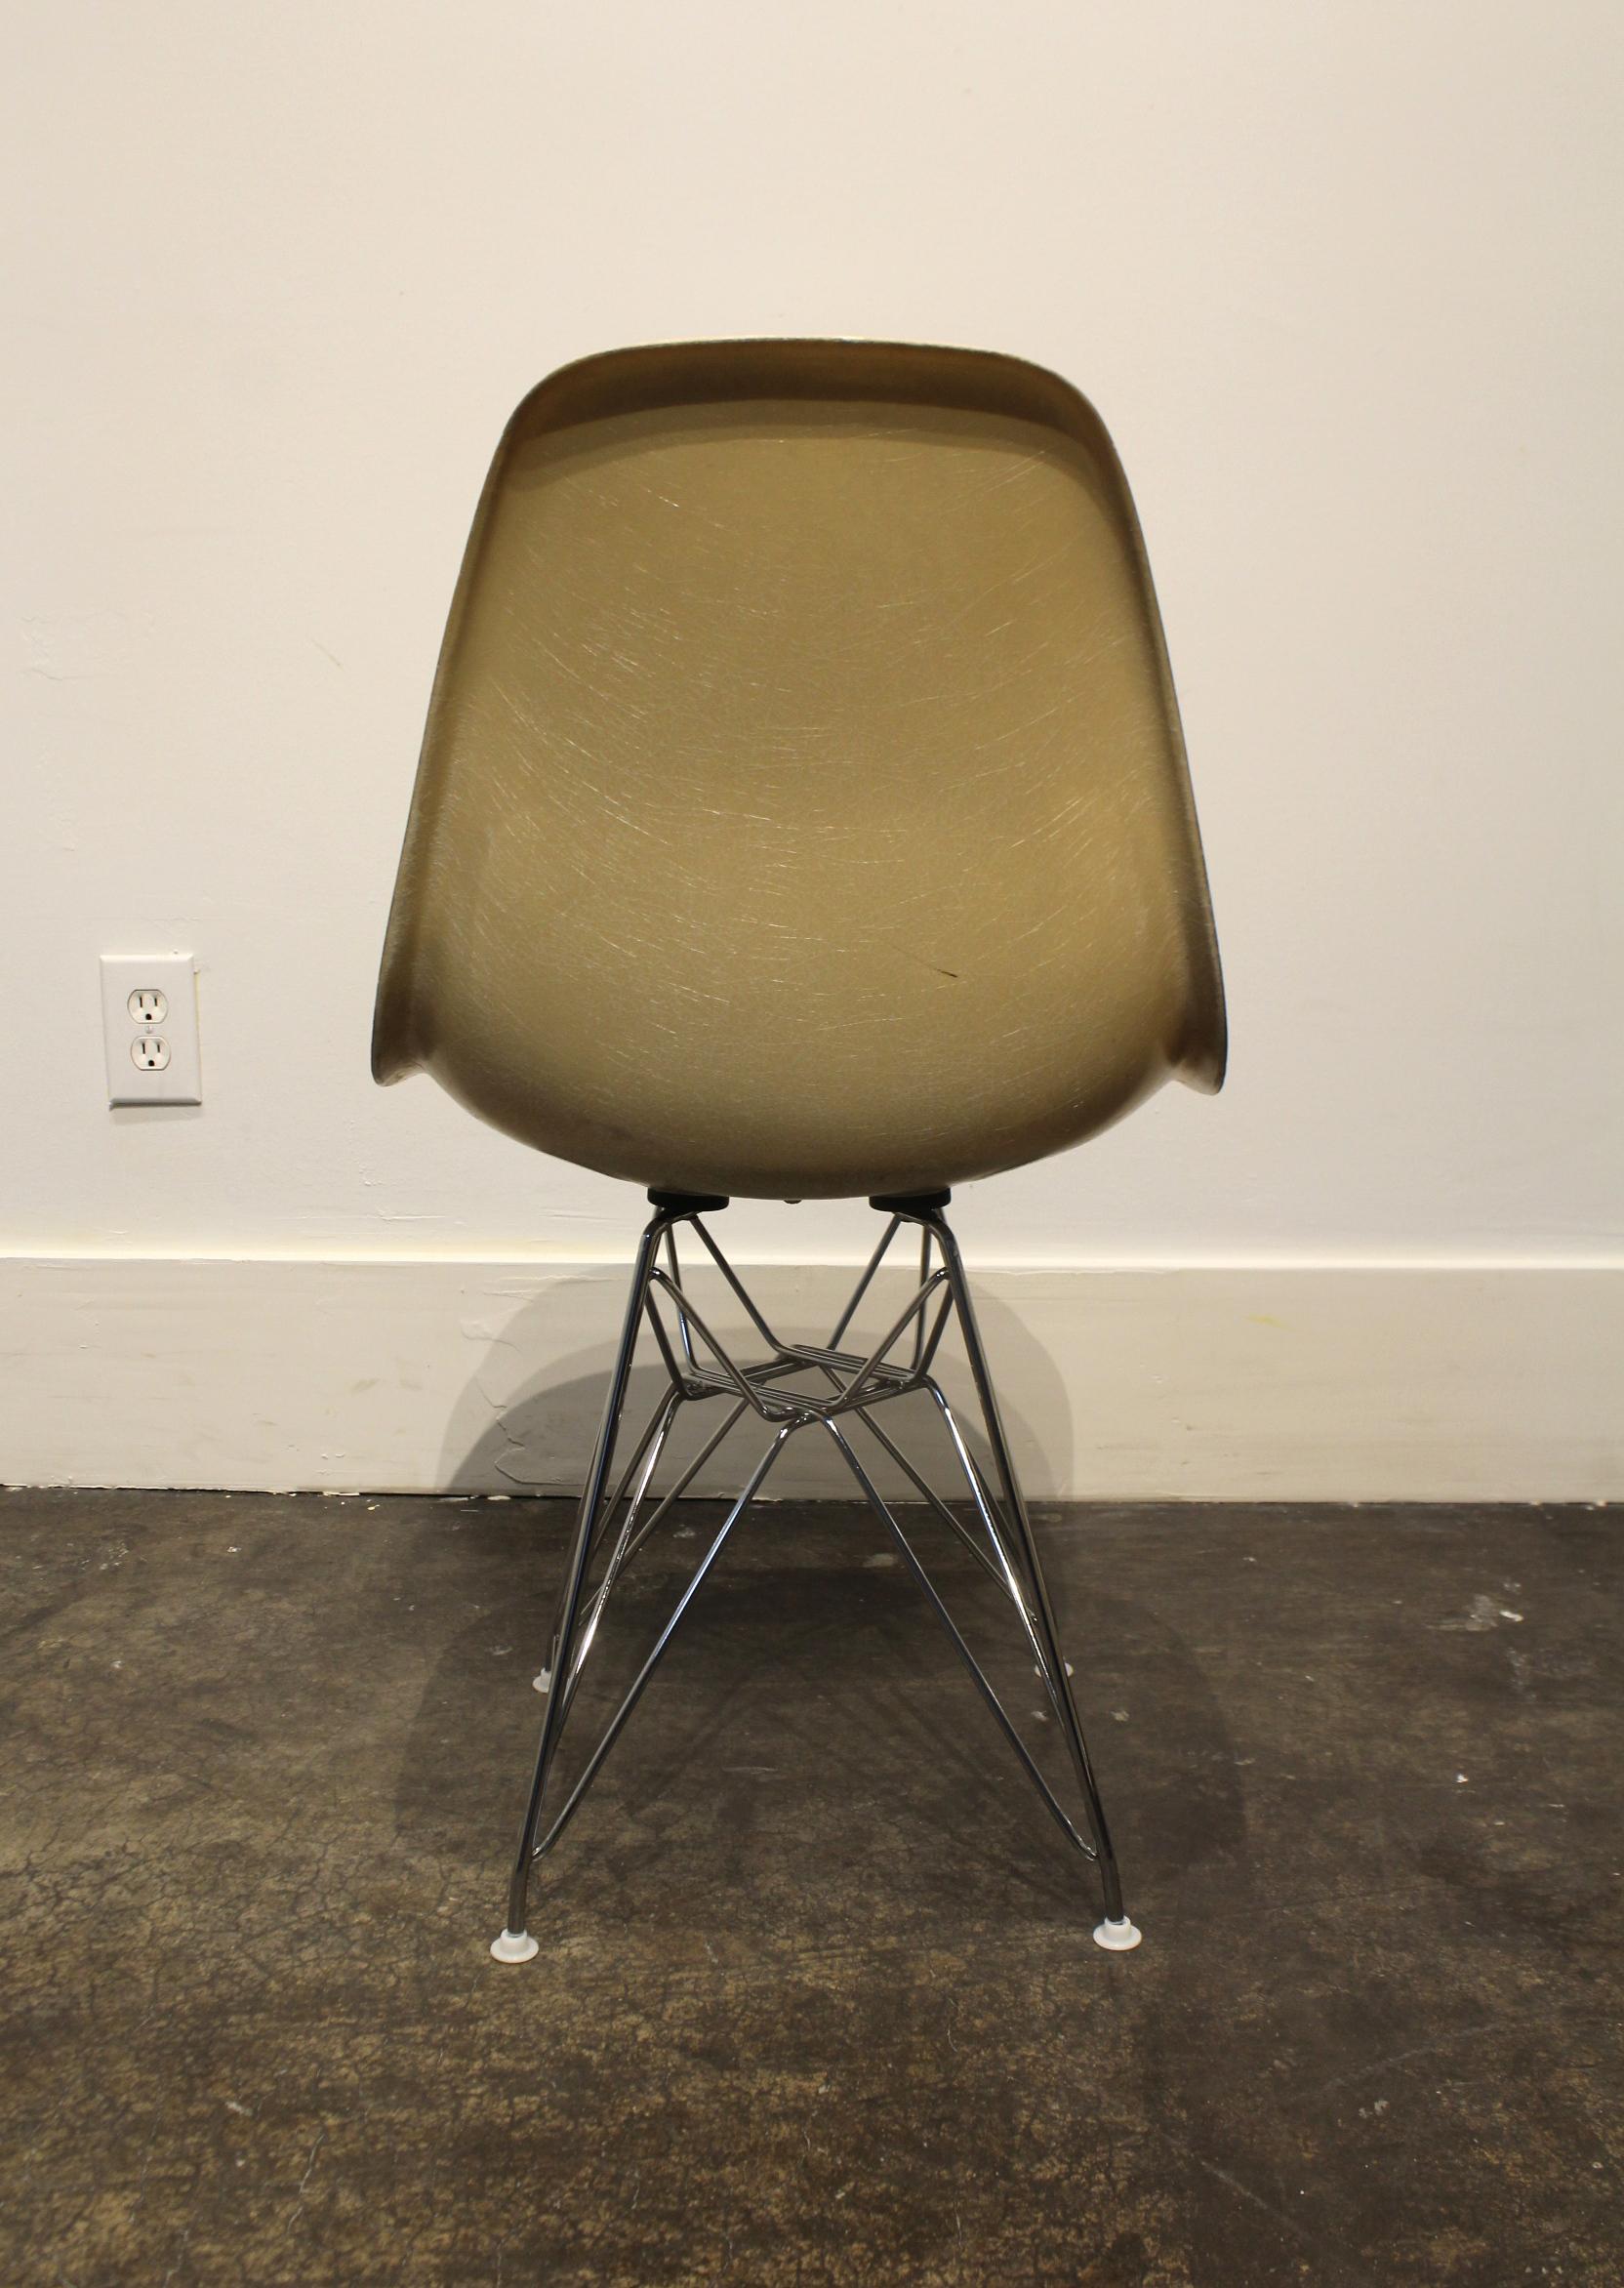 Steel Eames for Herman Miller Fiberglass Side Chairs Eiffel Tower Base 12 Available For Sale